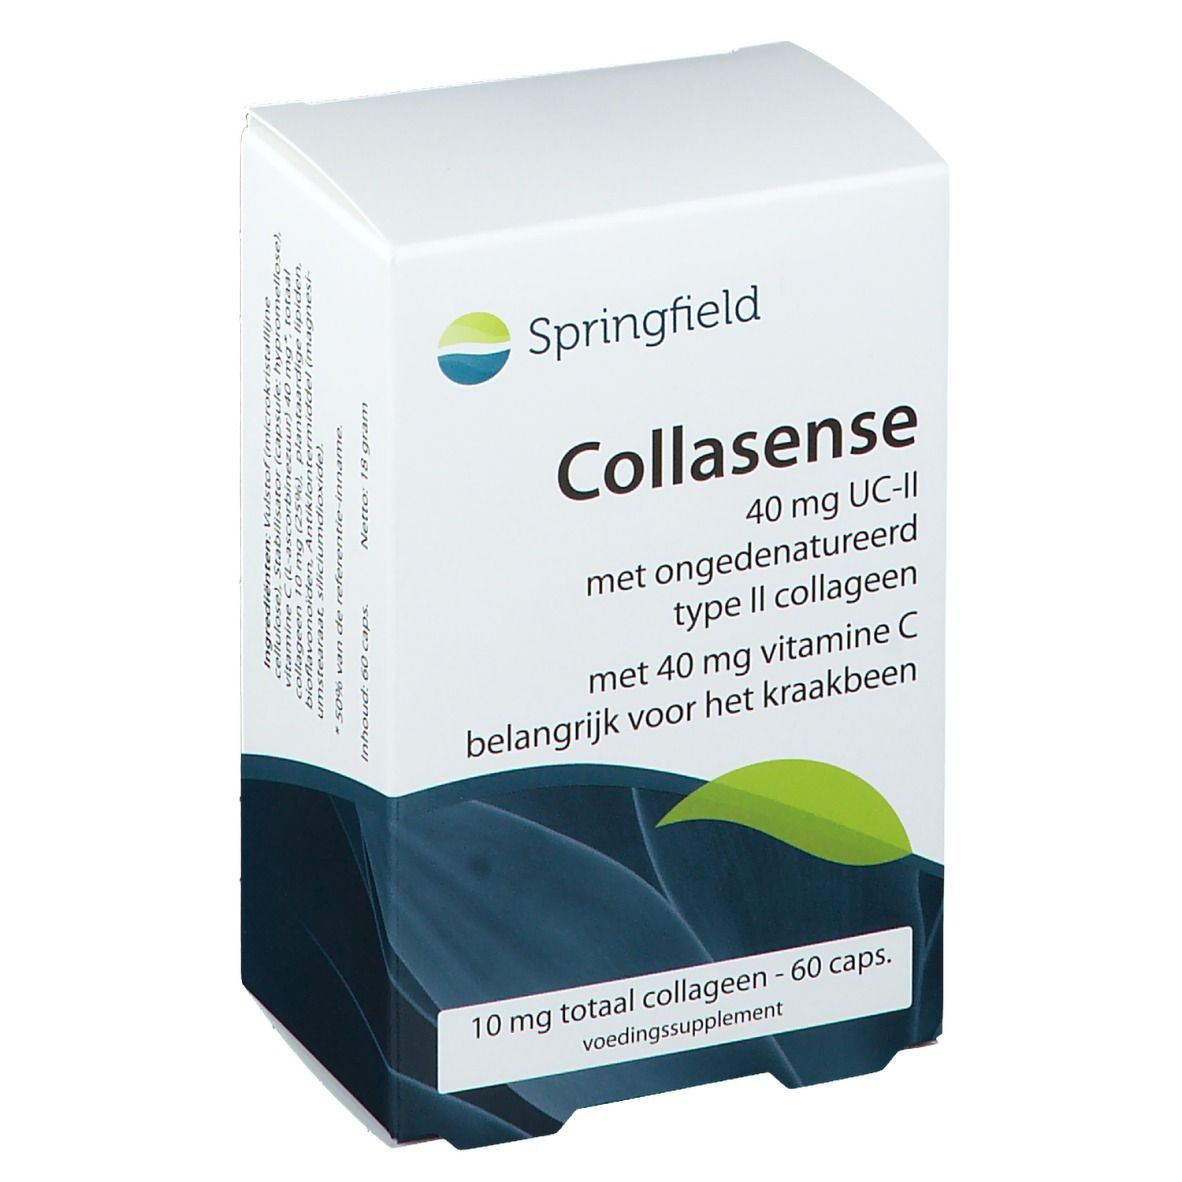 Image of Springfield Collasense